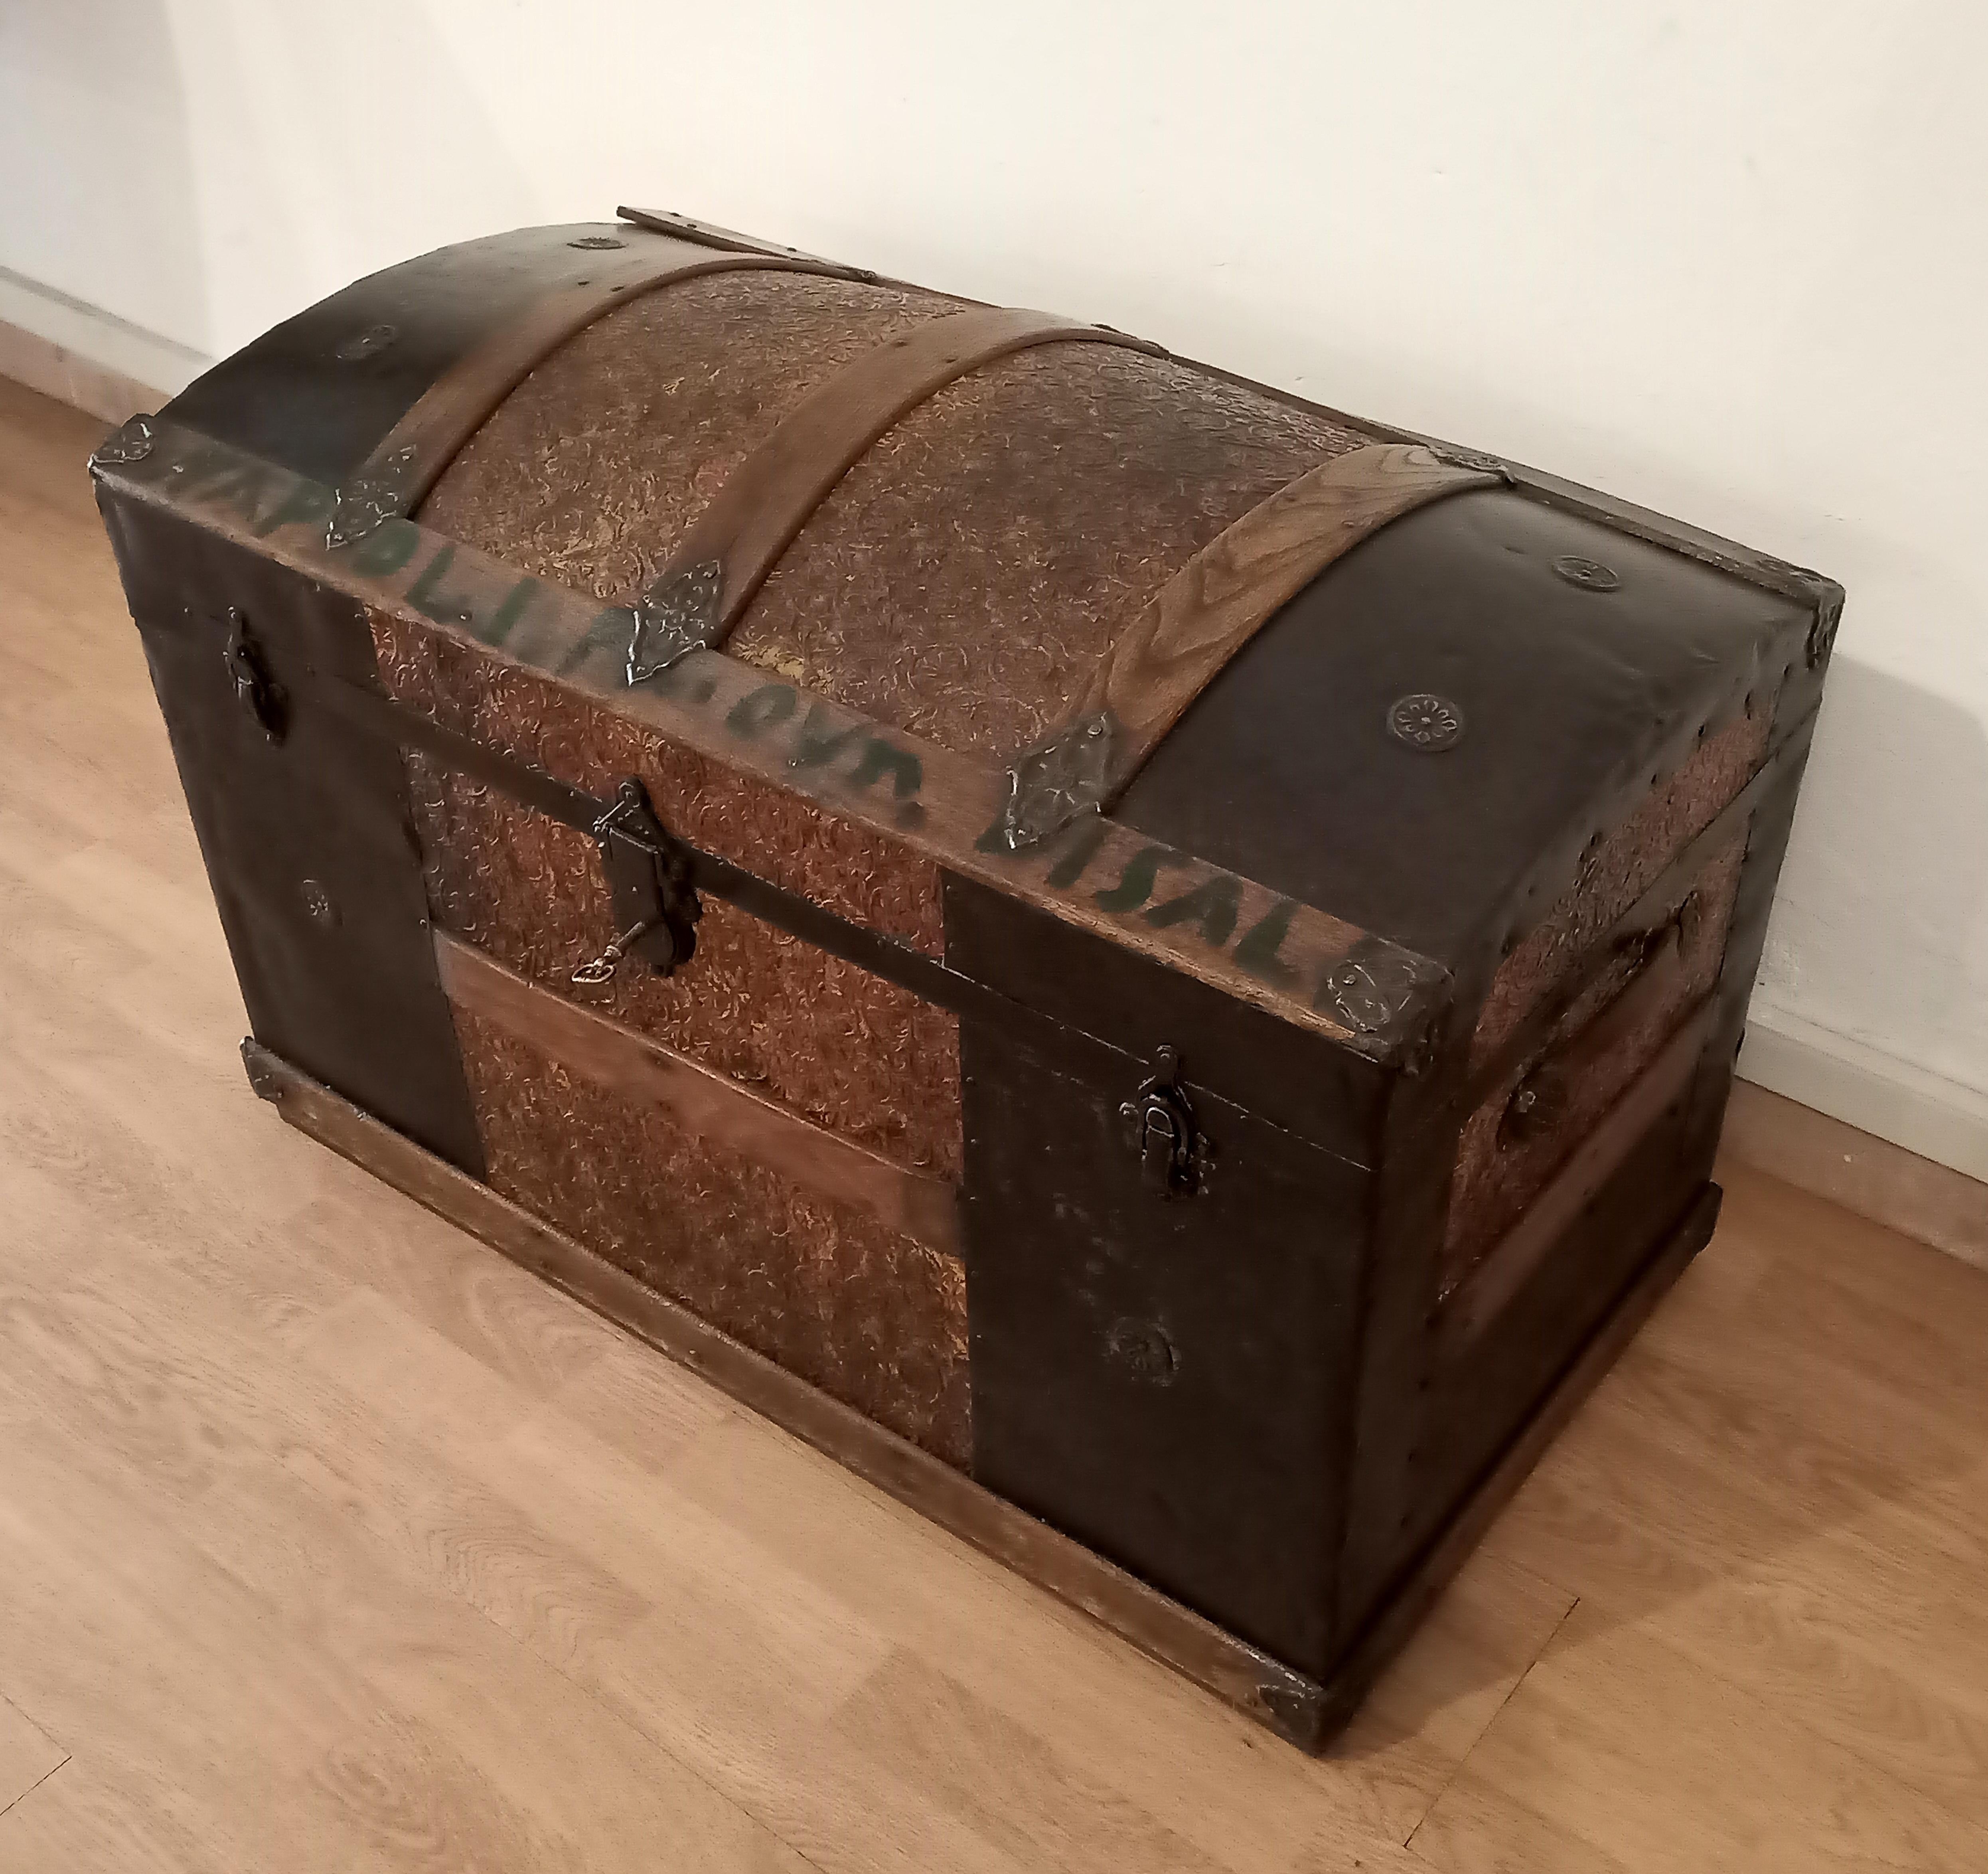 Twentieth century emigrant trunk

Subject: Travel trunk
Period: around 1910
Style: treasure chest
Provenance: Unknown
Description:

Twentieth century emigrant trunk

Very pleasant aesthetically pleasing wooden and iron chest. Made of poplar wood for